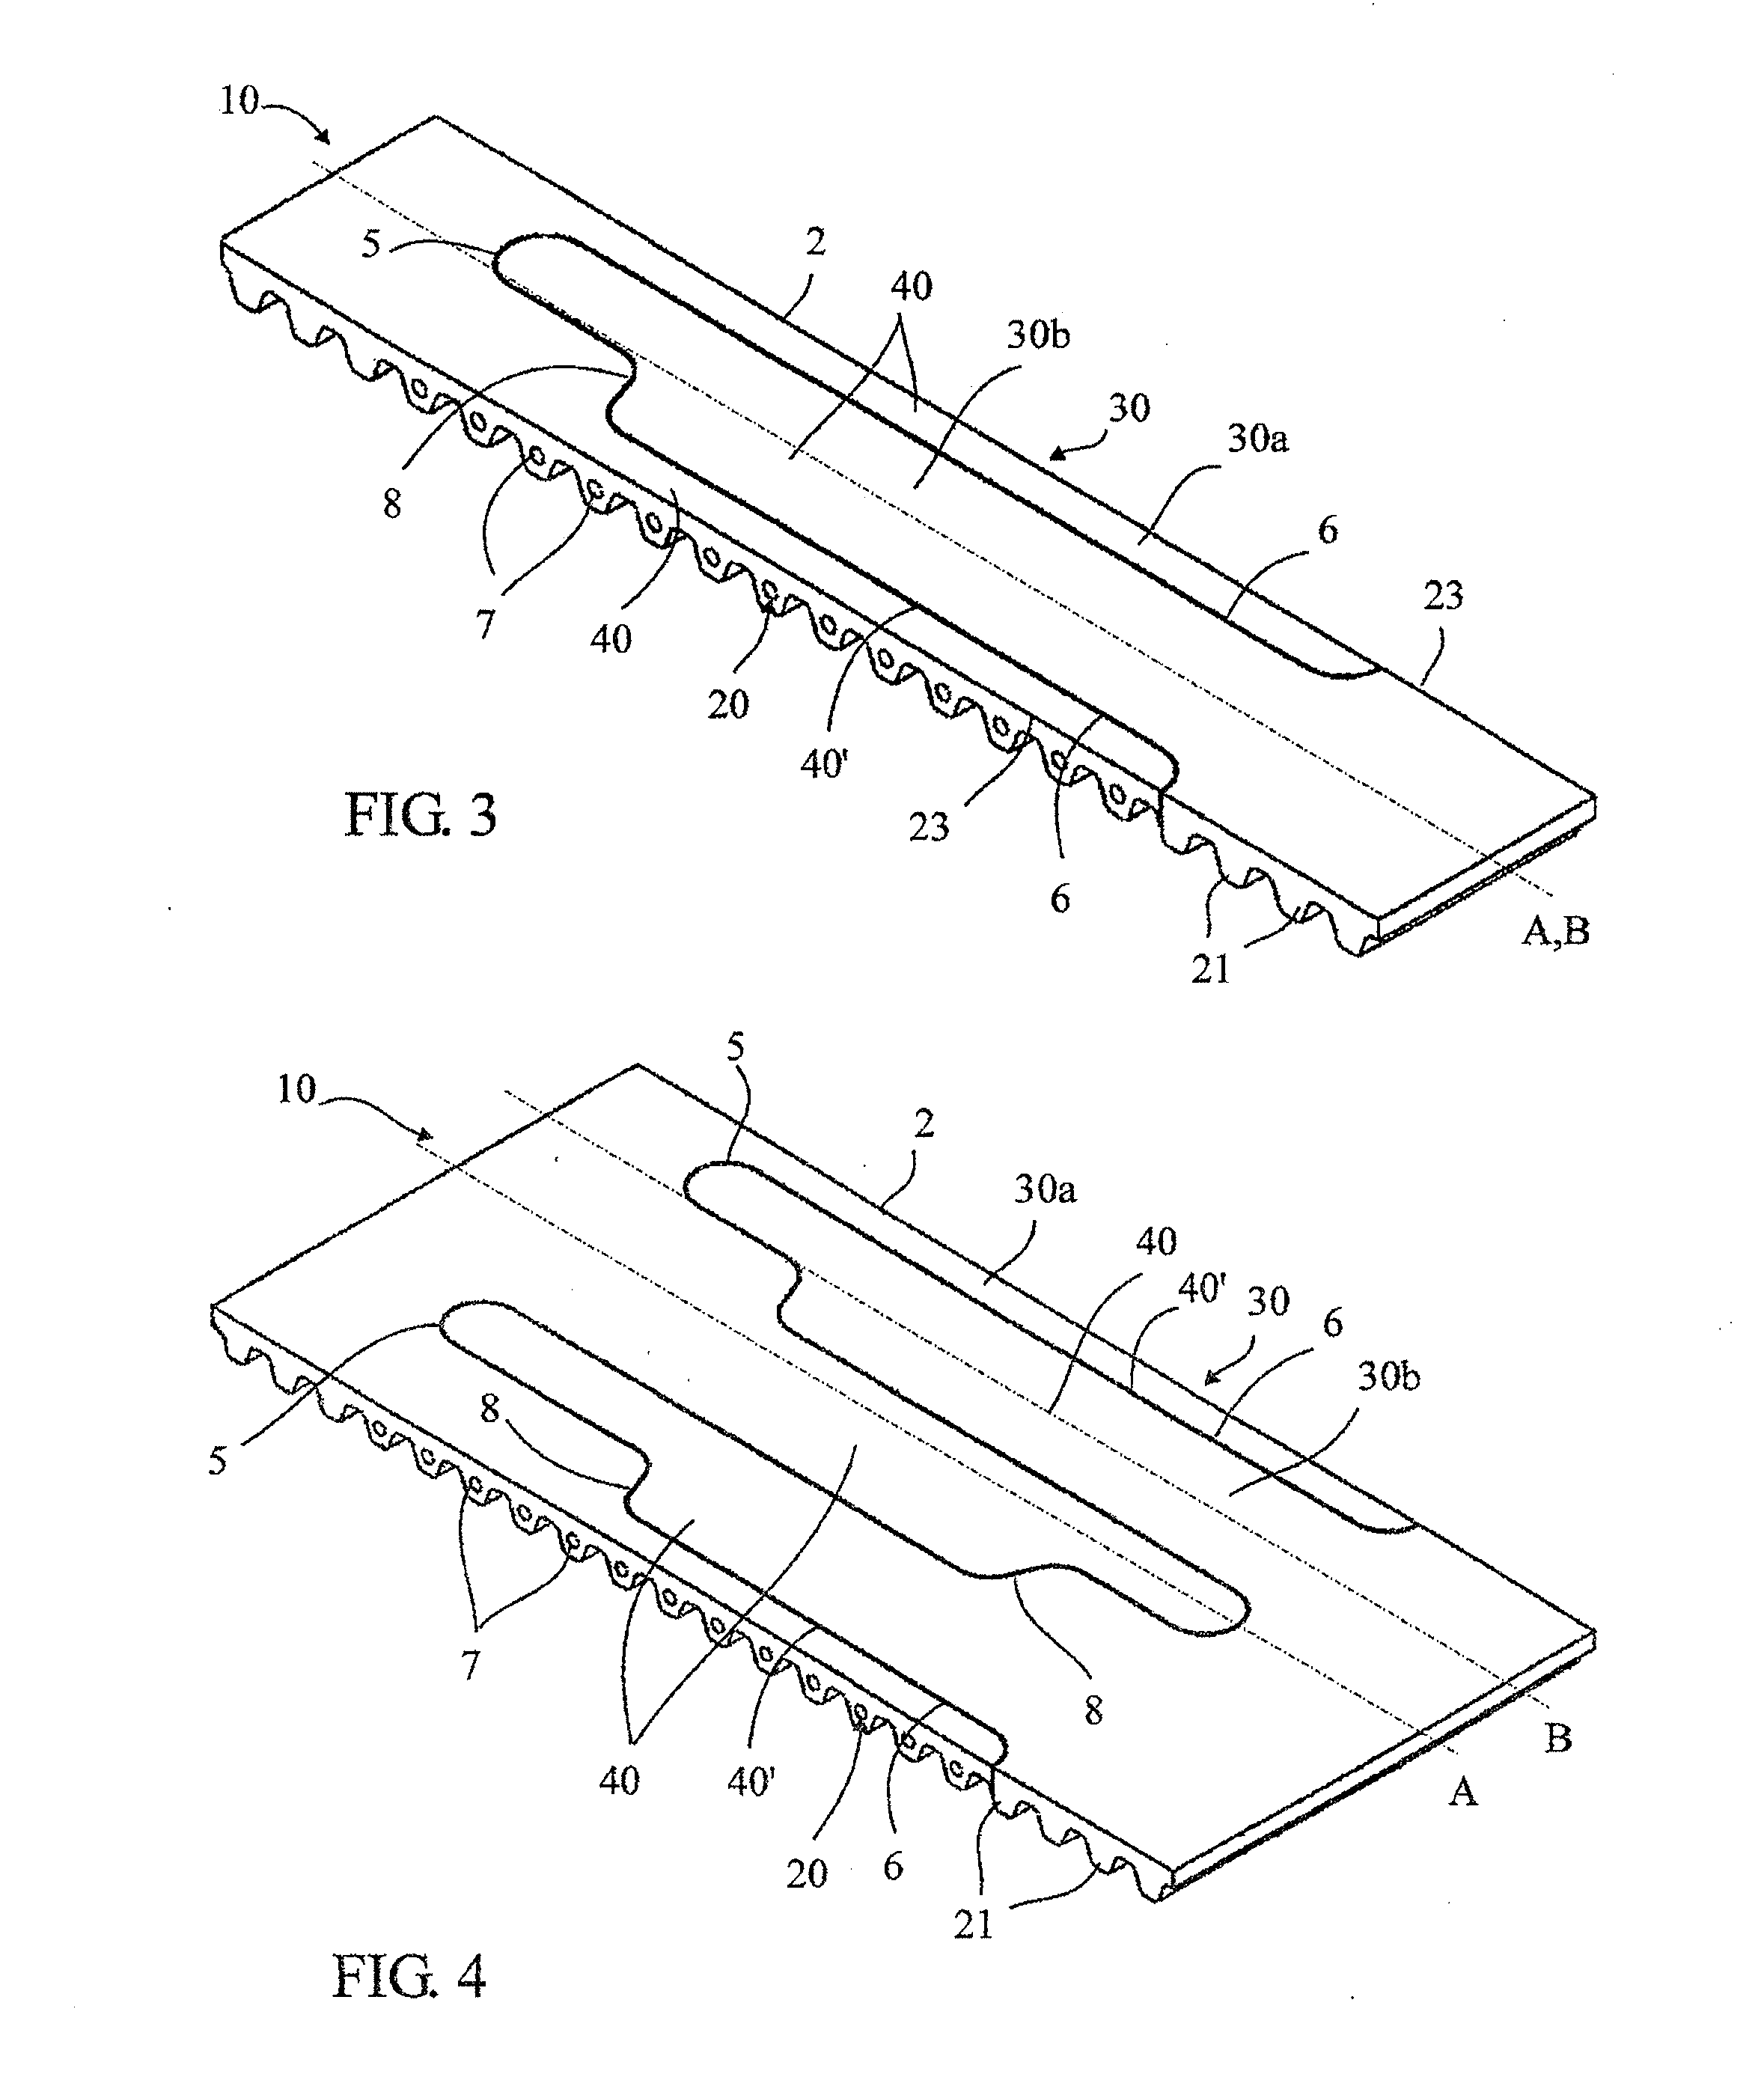 Looped material band provided with a splice